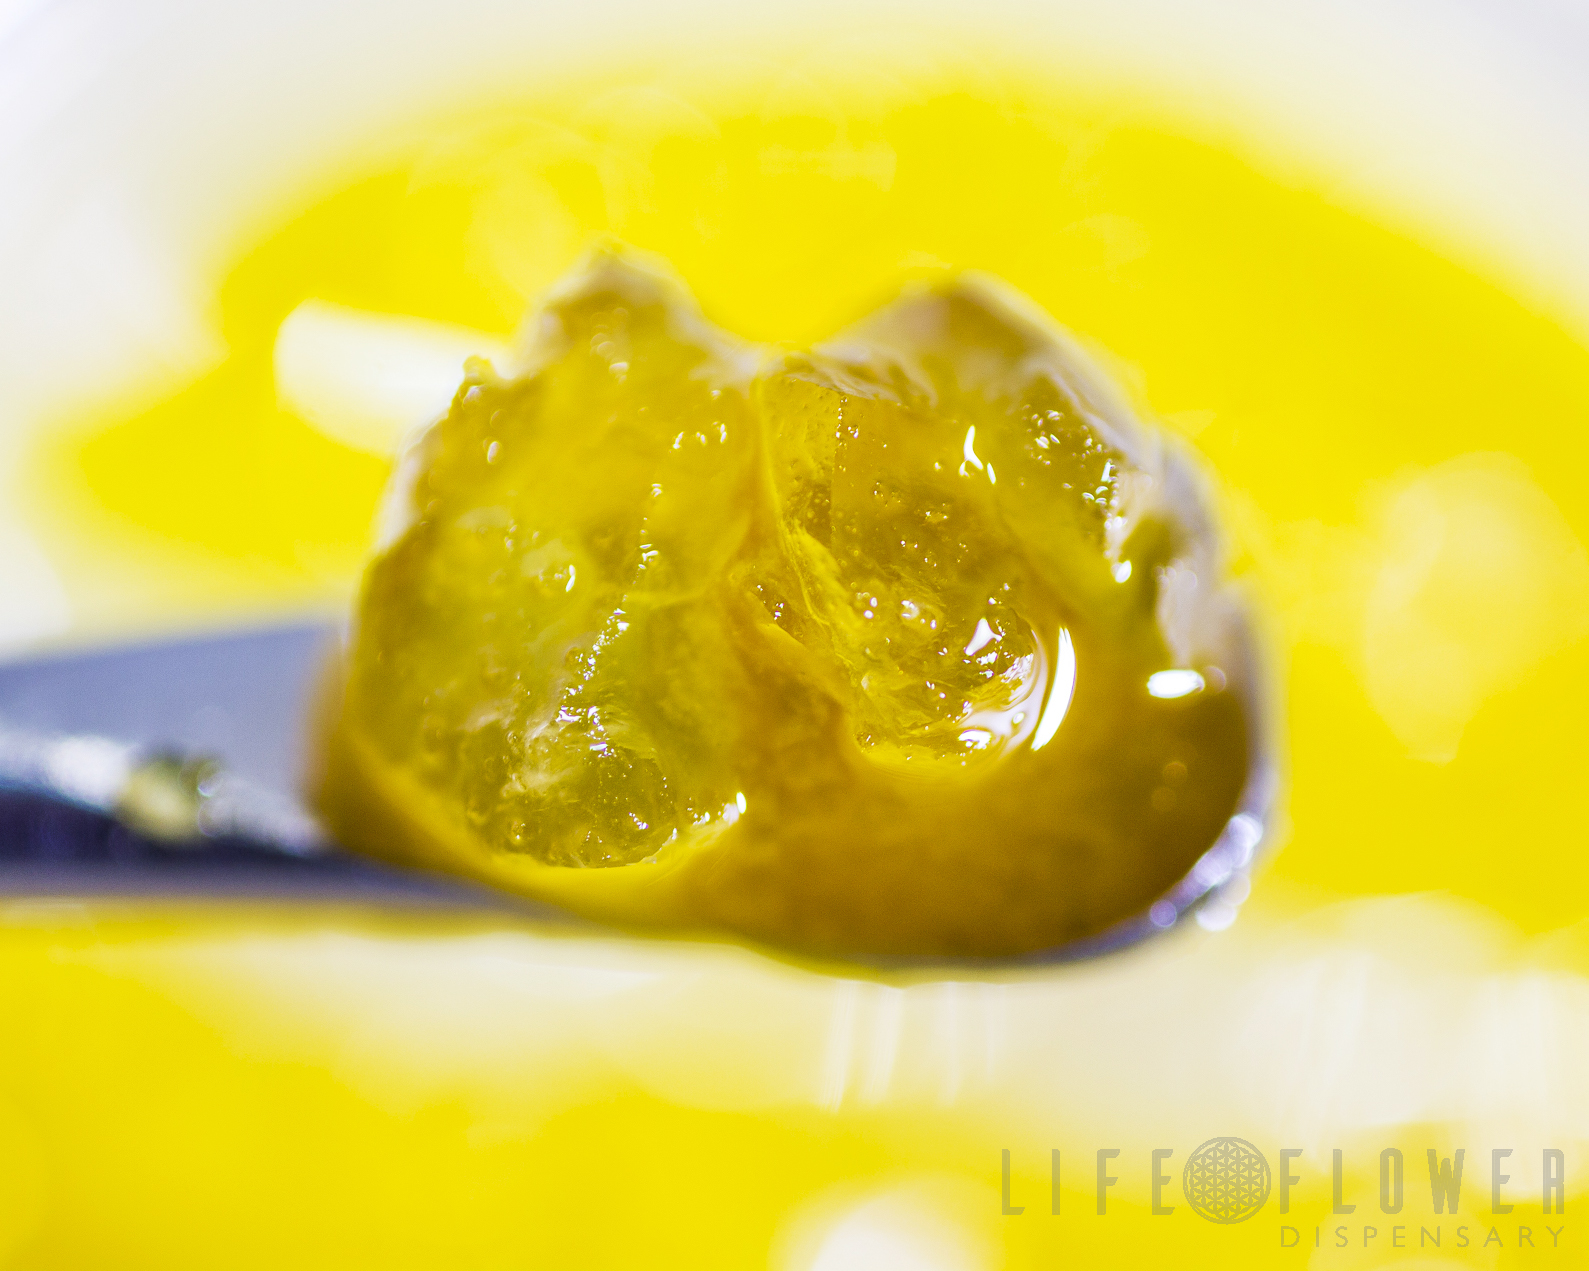 Medical & Recreational Live Resin Concentrates